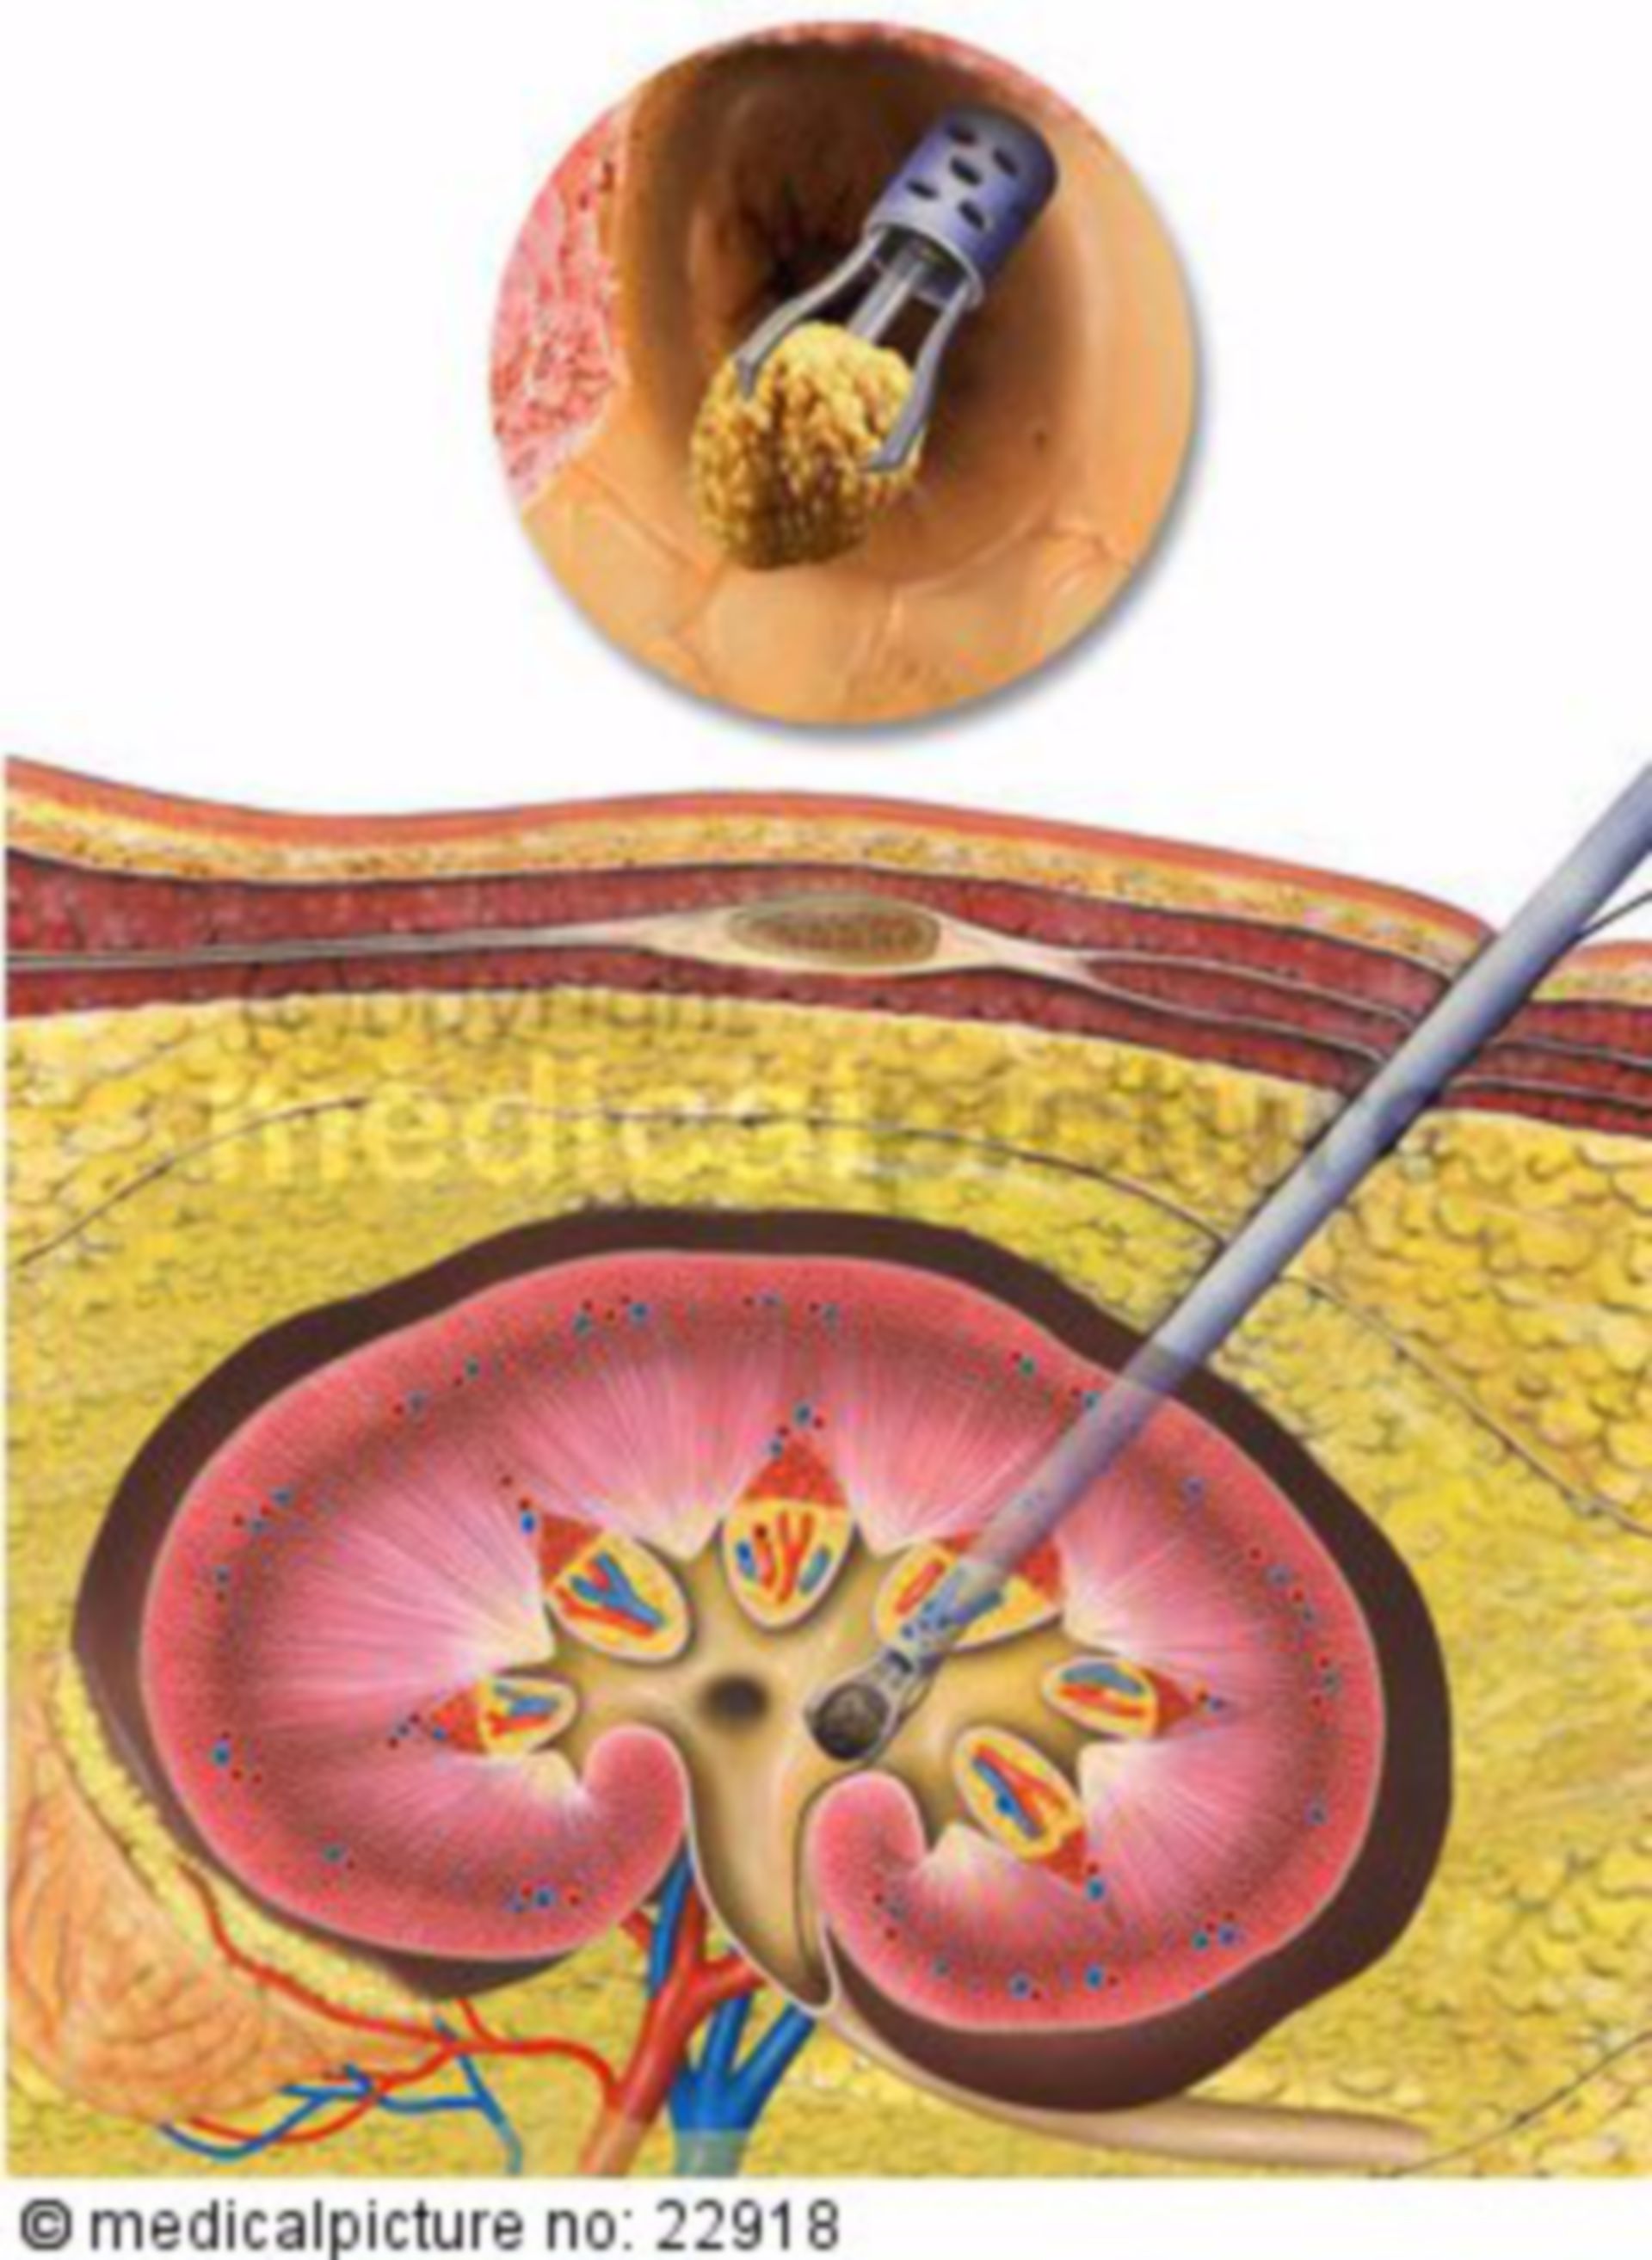 Renal biopsy due to kidney stones